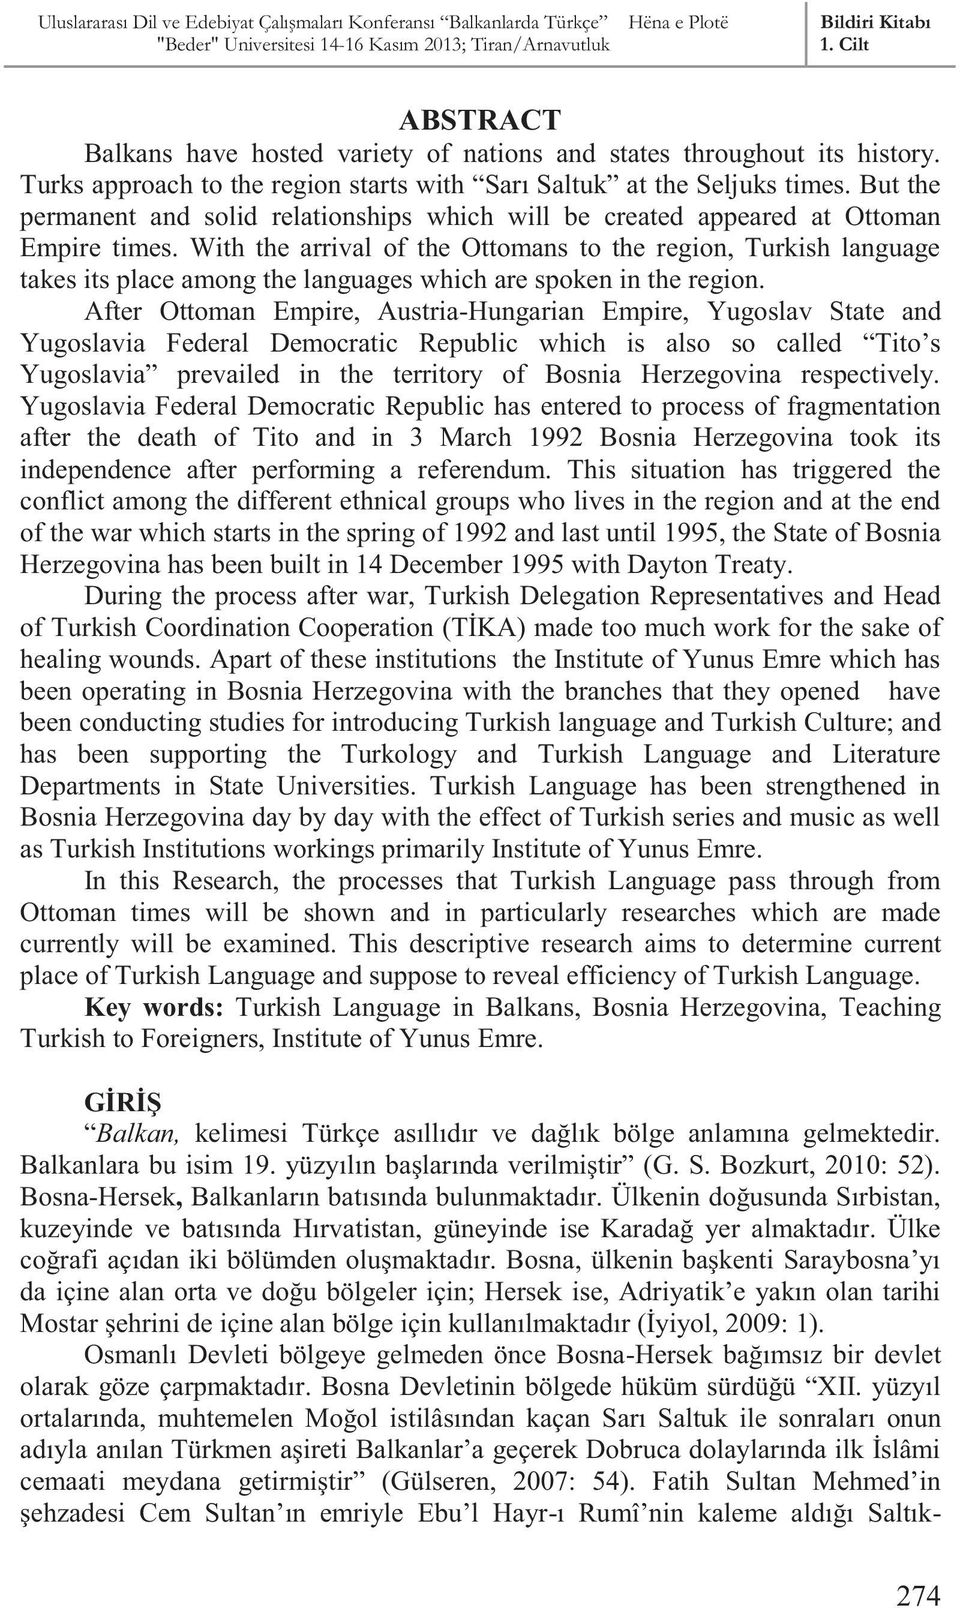 With the arrival of the Ottomans to the region, Turkish language takes its place among the languages which are spoken in the region.